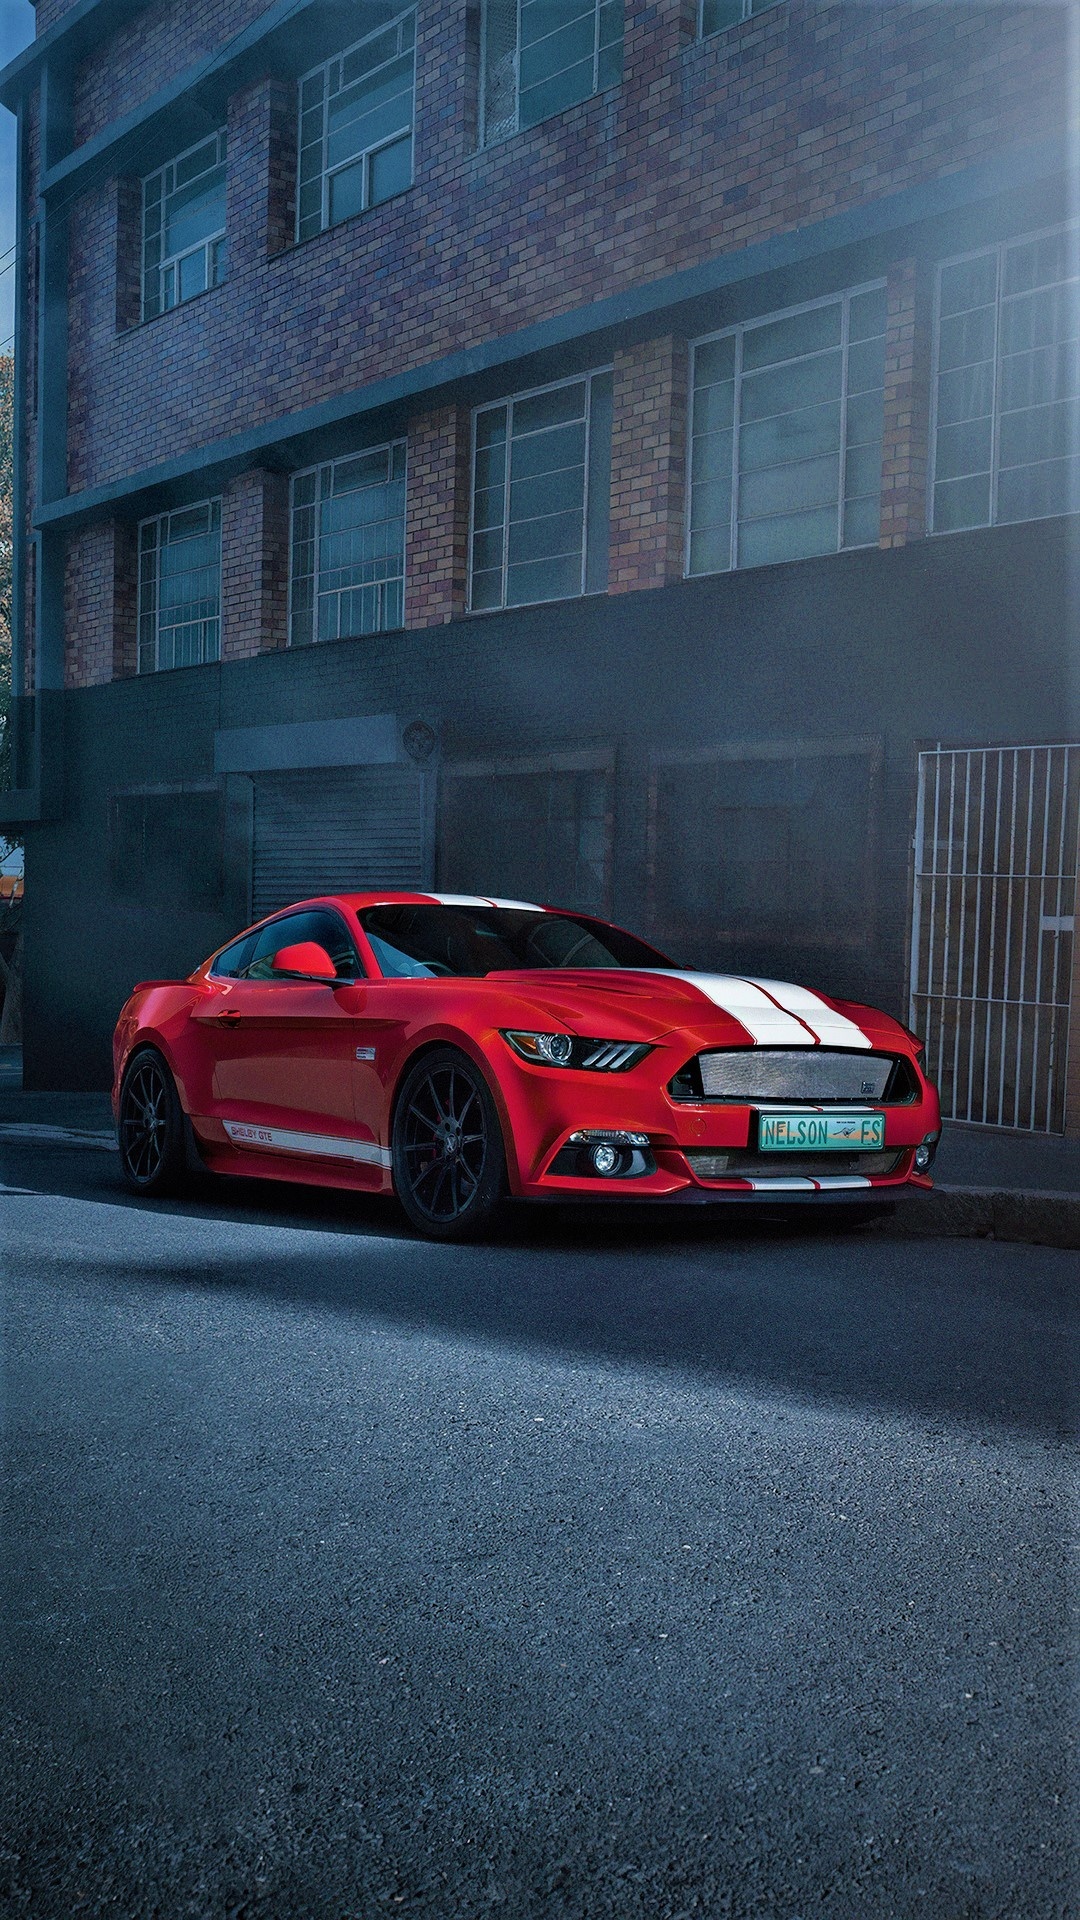 Classic Mustang, Legendary design, Iconic styling, Timeless American muscle, Revved engine, 1080x1920 Full HD Handy